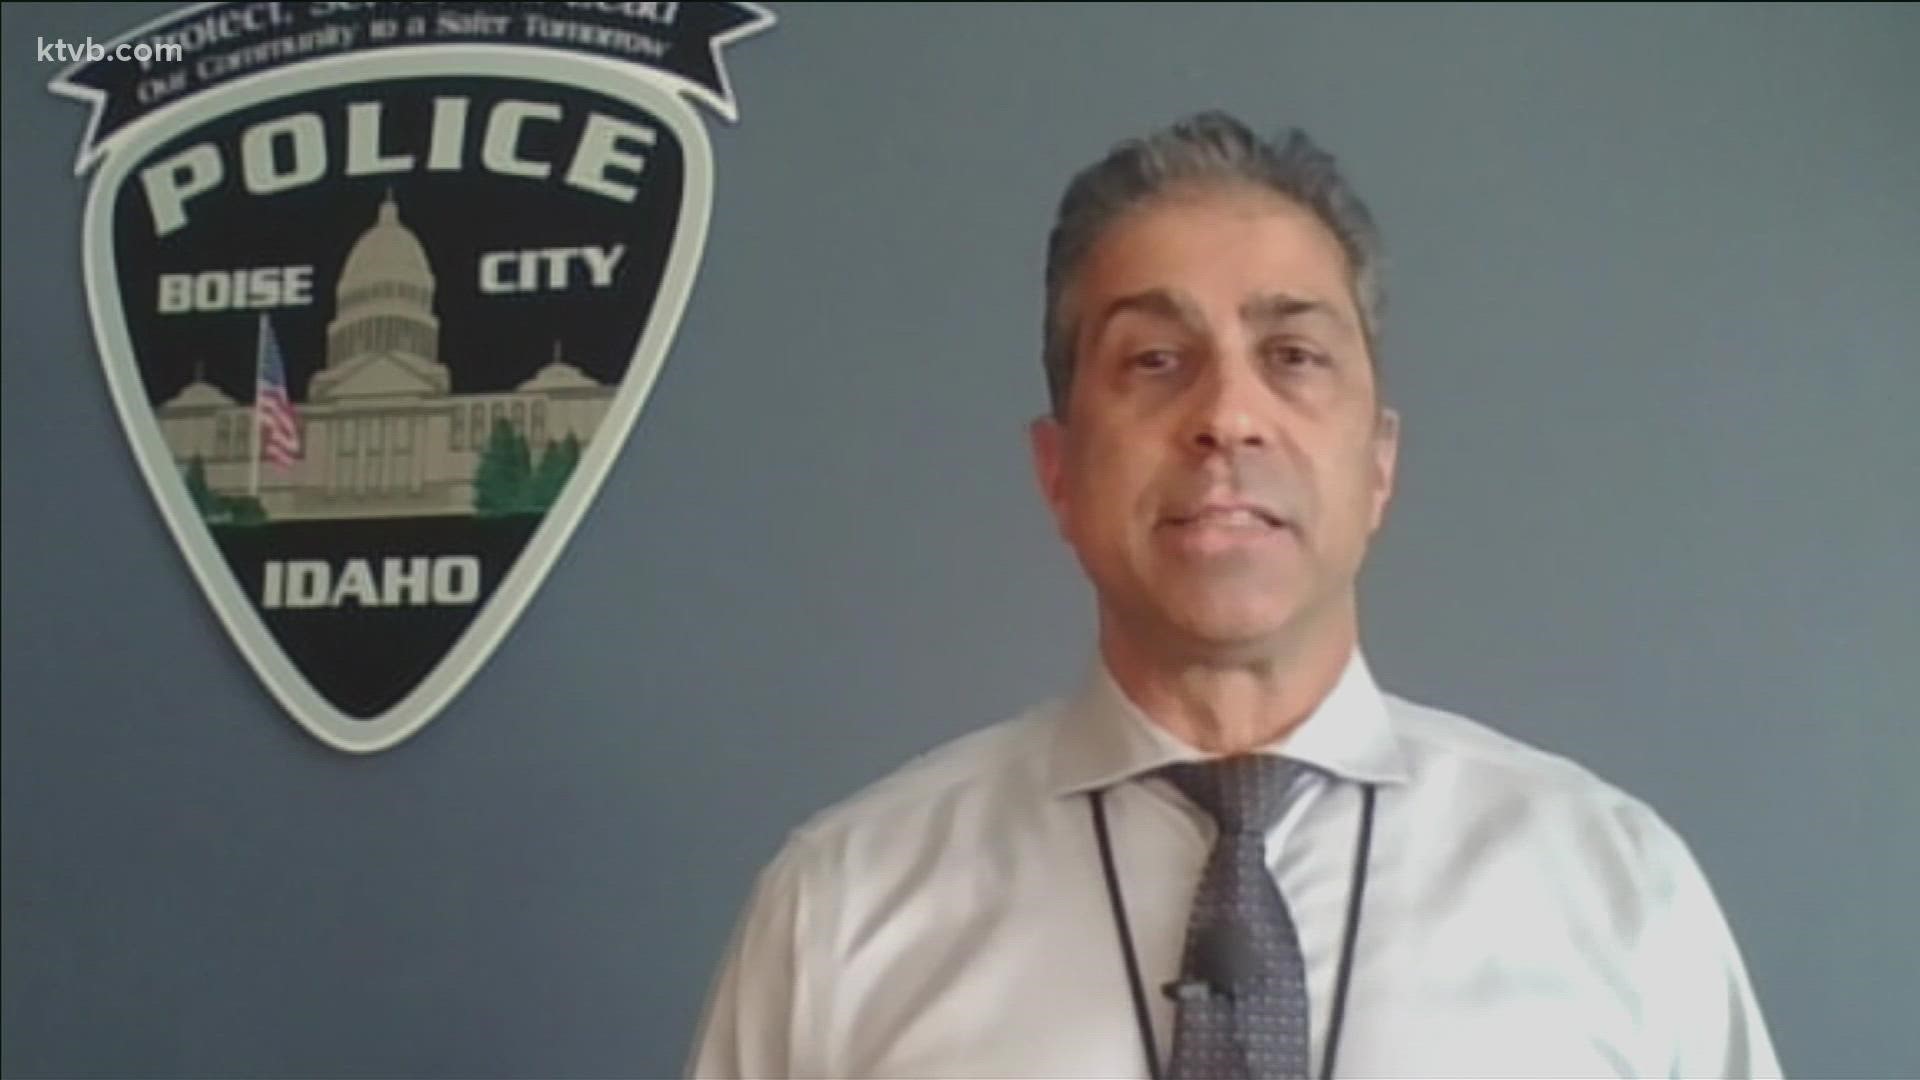 Det. Mike Miraglia discusses the 11 arrests made by police and how the community can help protect others.